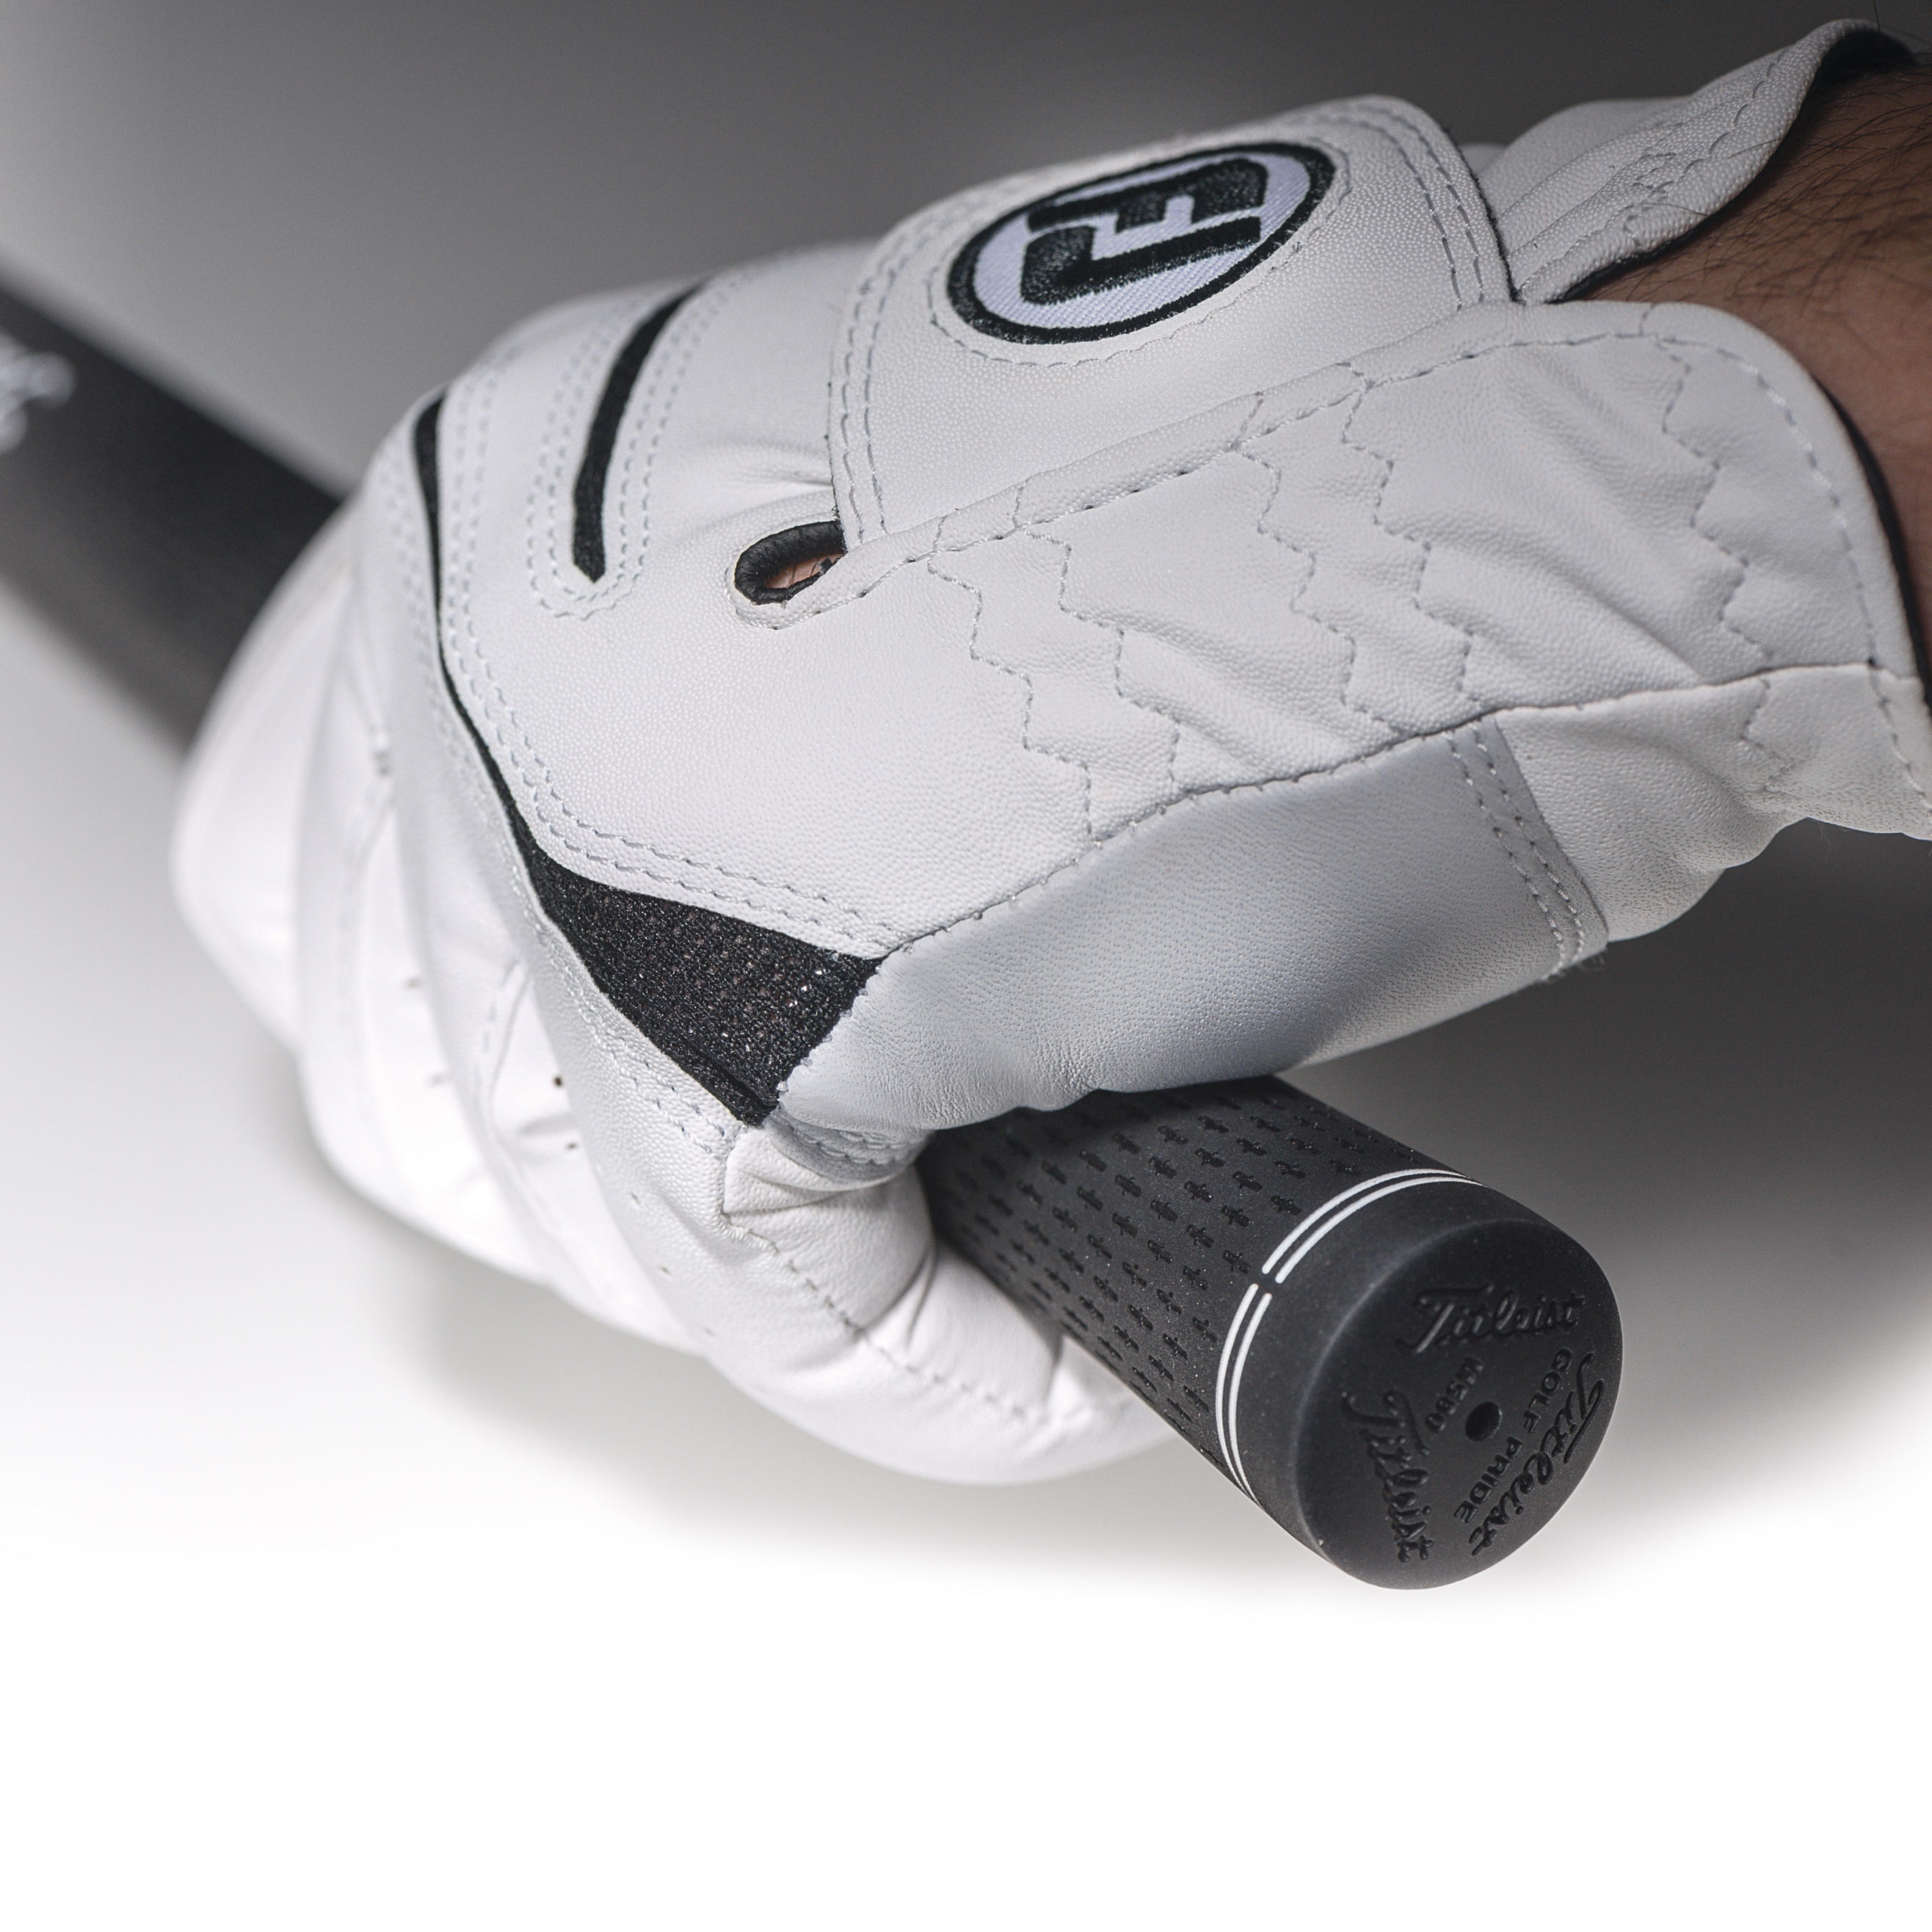 MEN'S GOLF GLOVE WEATHERSOF RIGHT HANDED - FOOTJOY WHITE 3/4